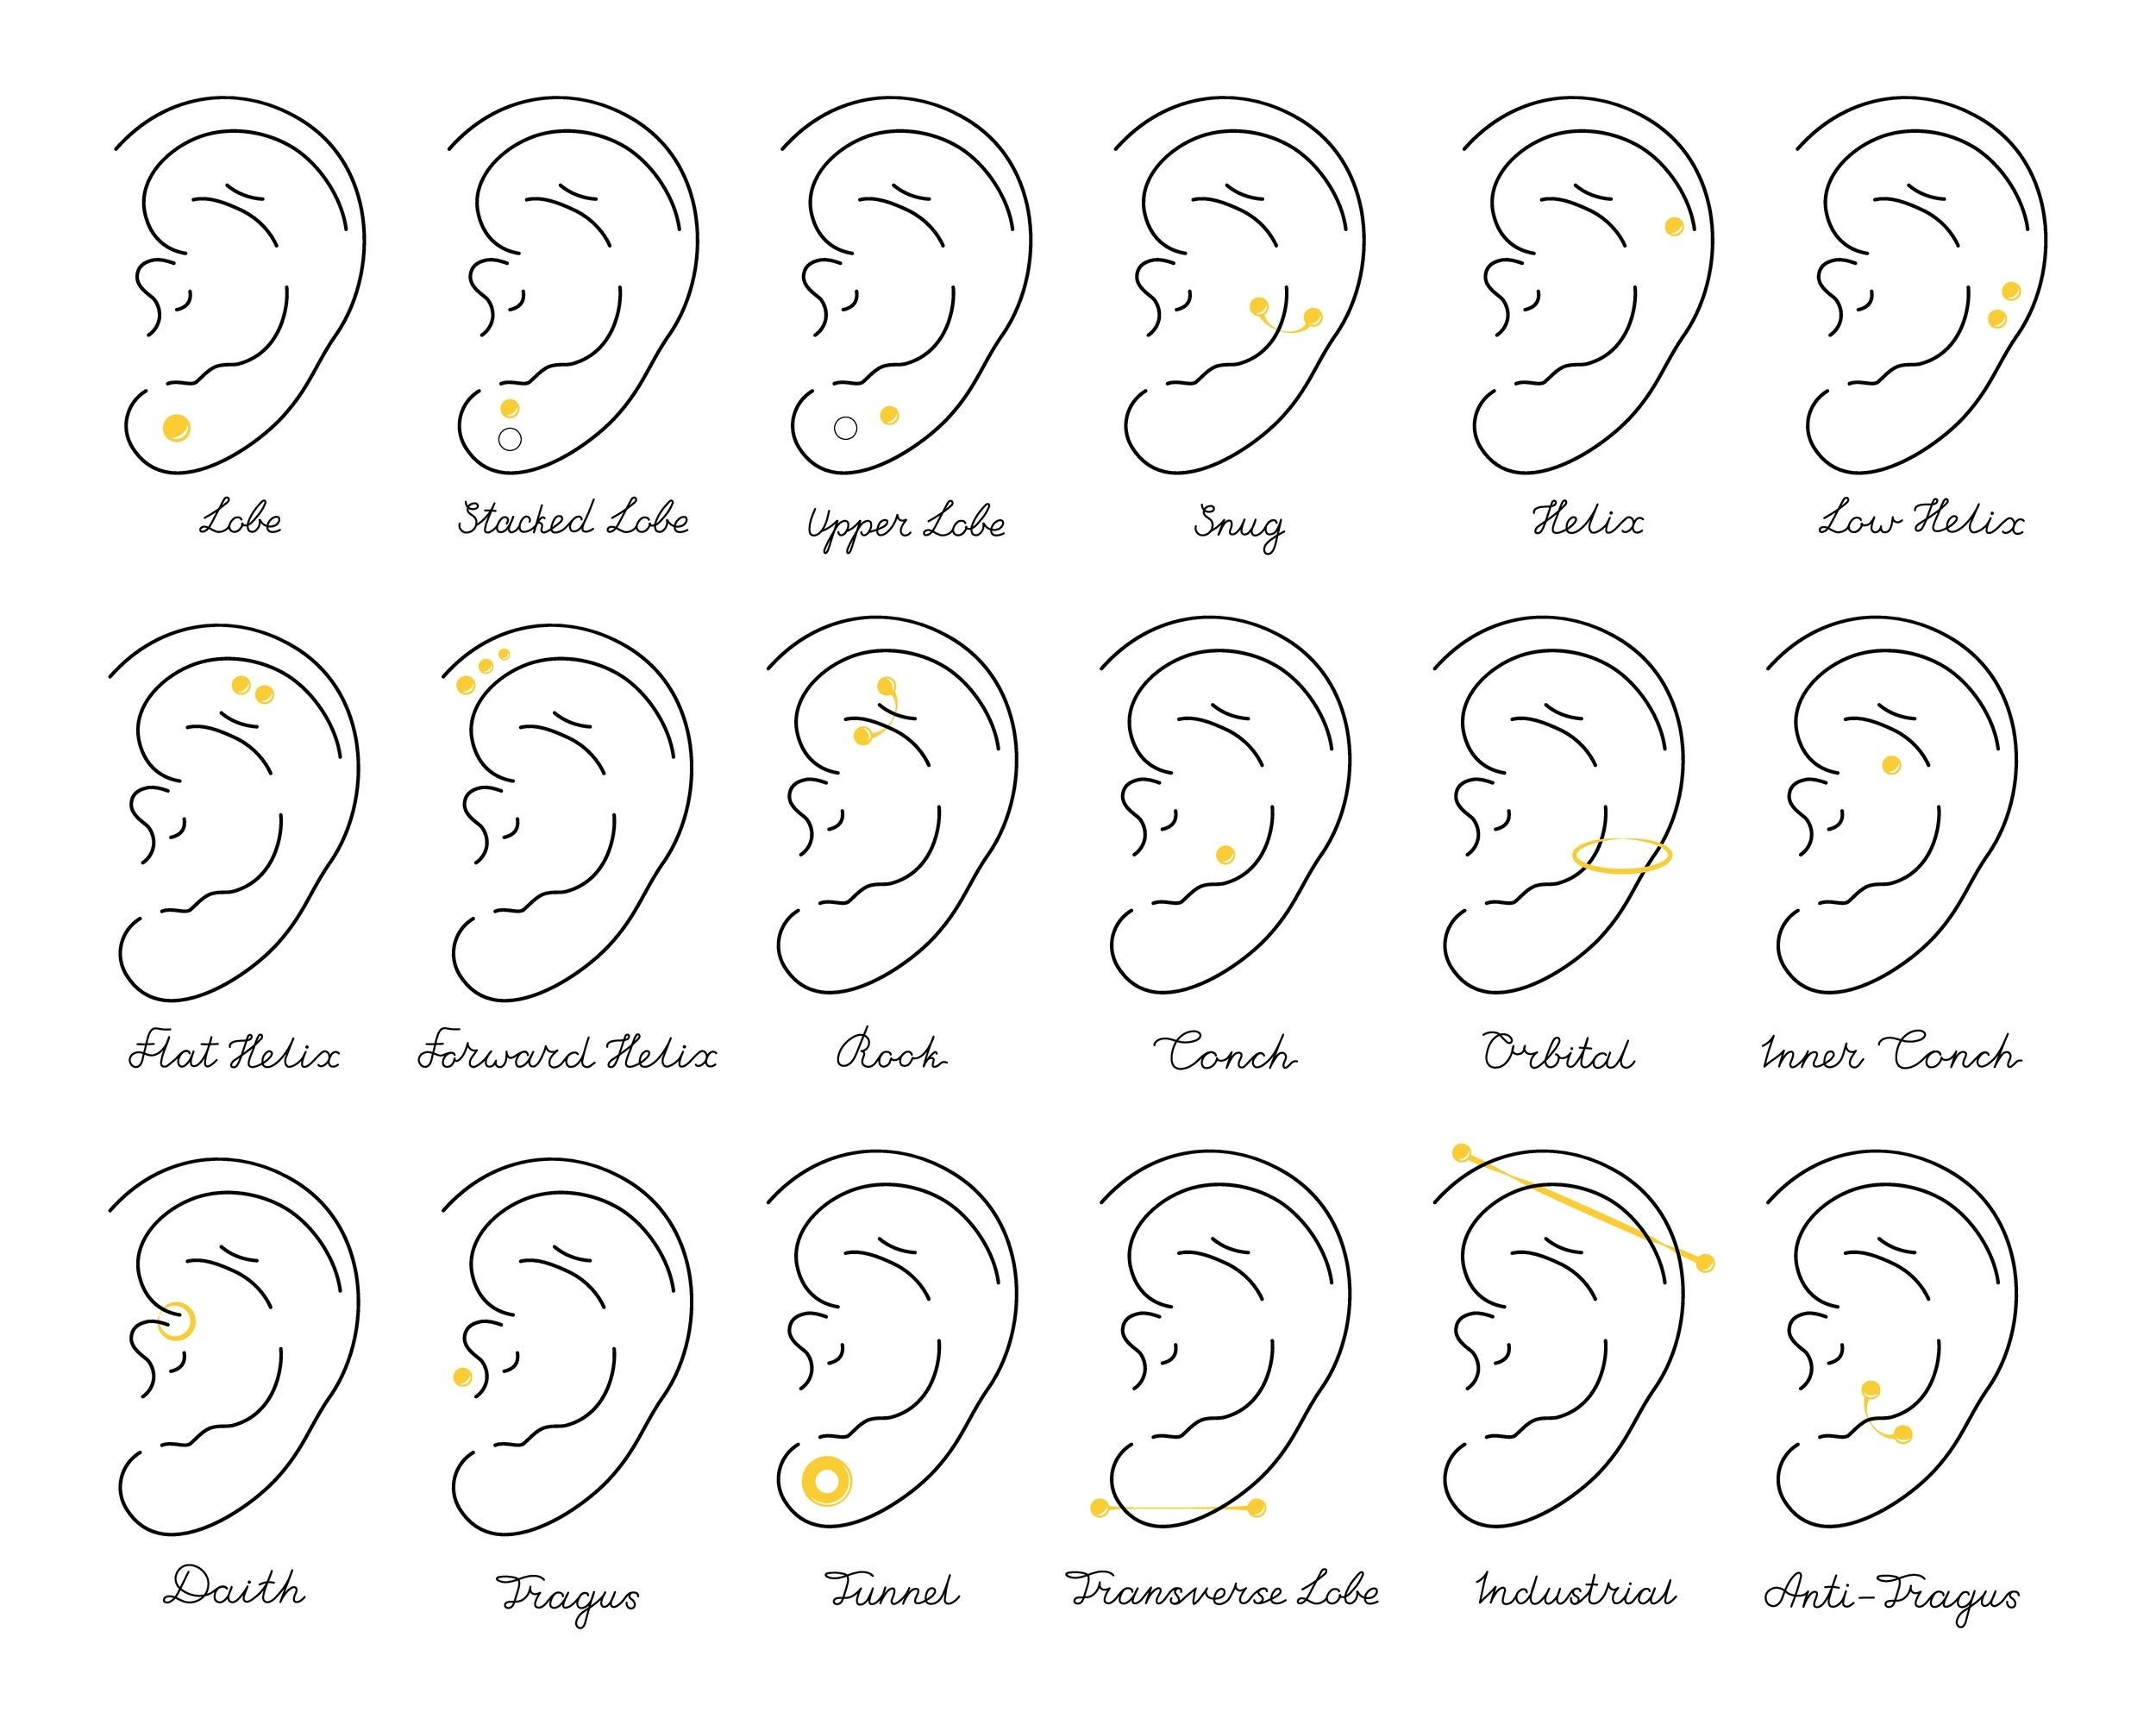 Some of the most popular types of ear piercings and their names - So Scene